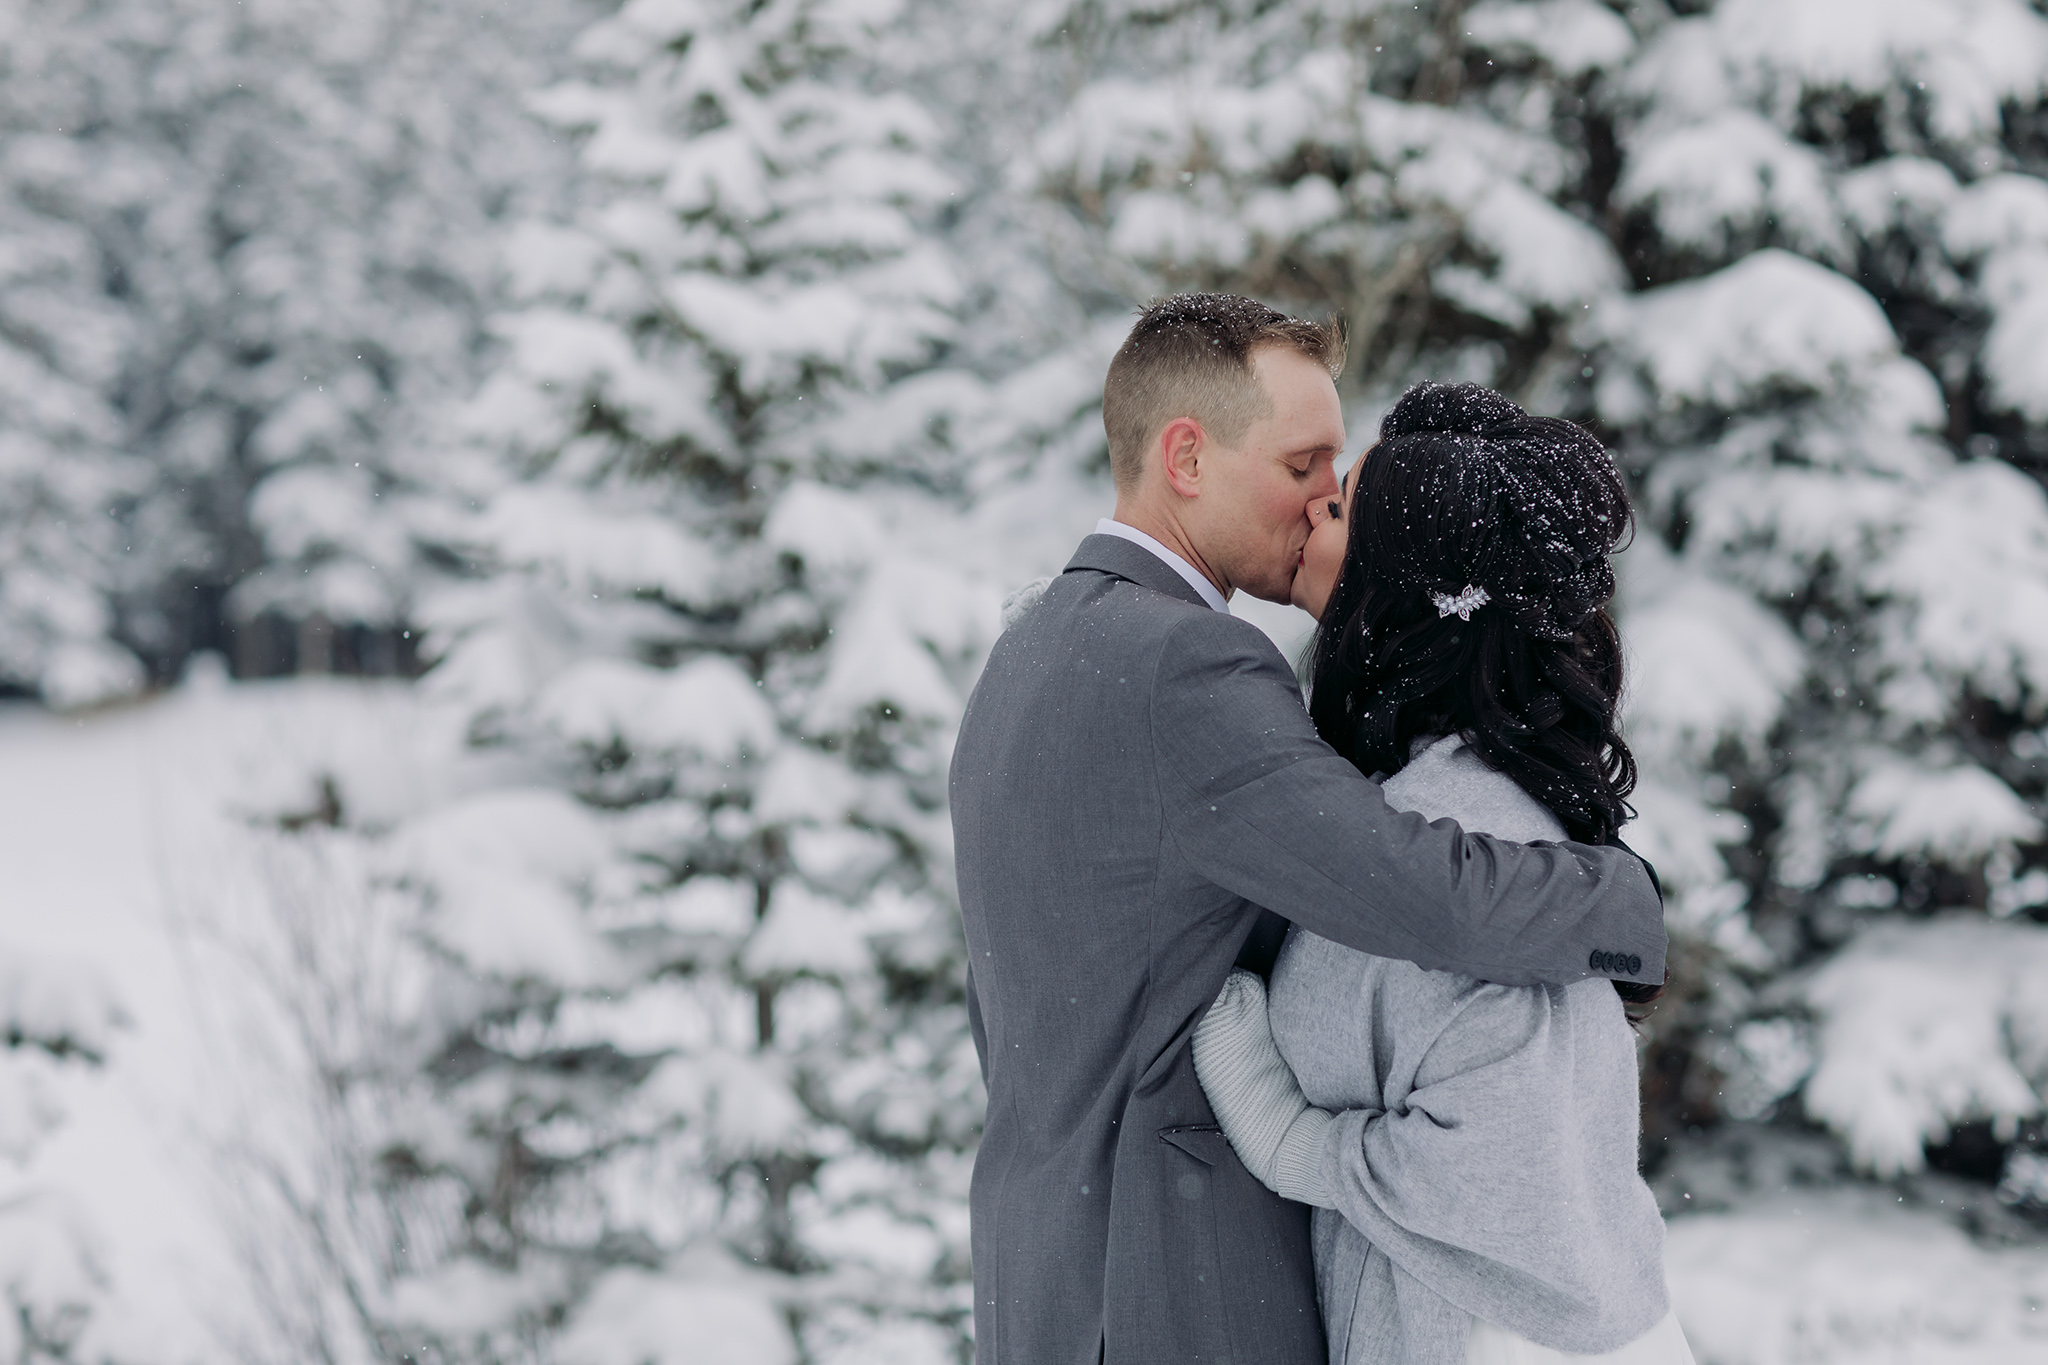 Cascade Ponds winter wedding outdoor ceremony in a snow storm in Banff National Park in the Canadian Rocky Mountains photographed by ENV Photography